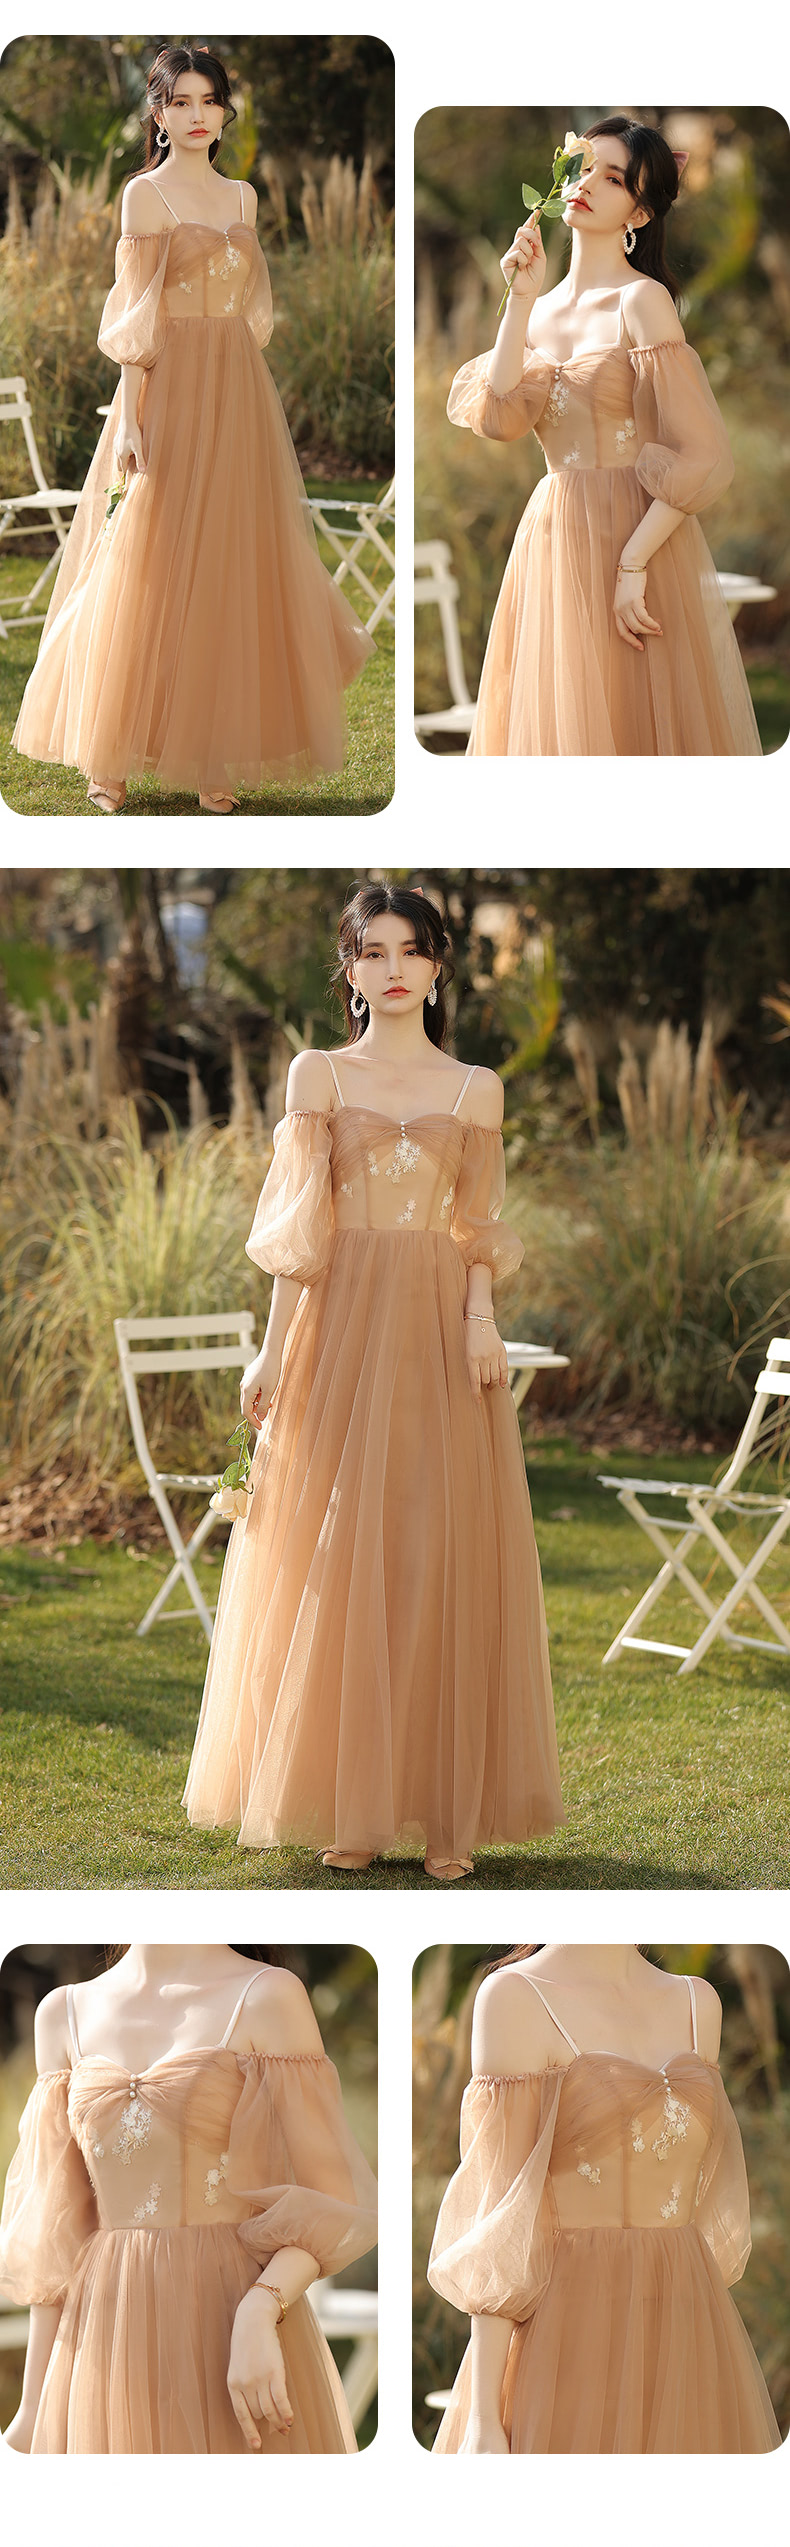 Fairy-Champagne-Bridesmaid-Long-Dress-Sweet-Evening-Formal-Gown19.jpg